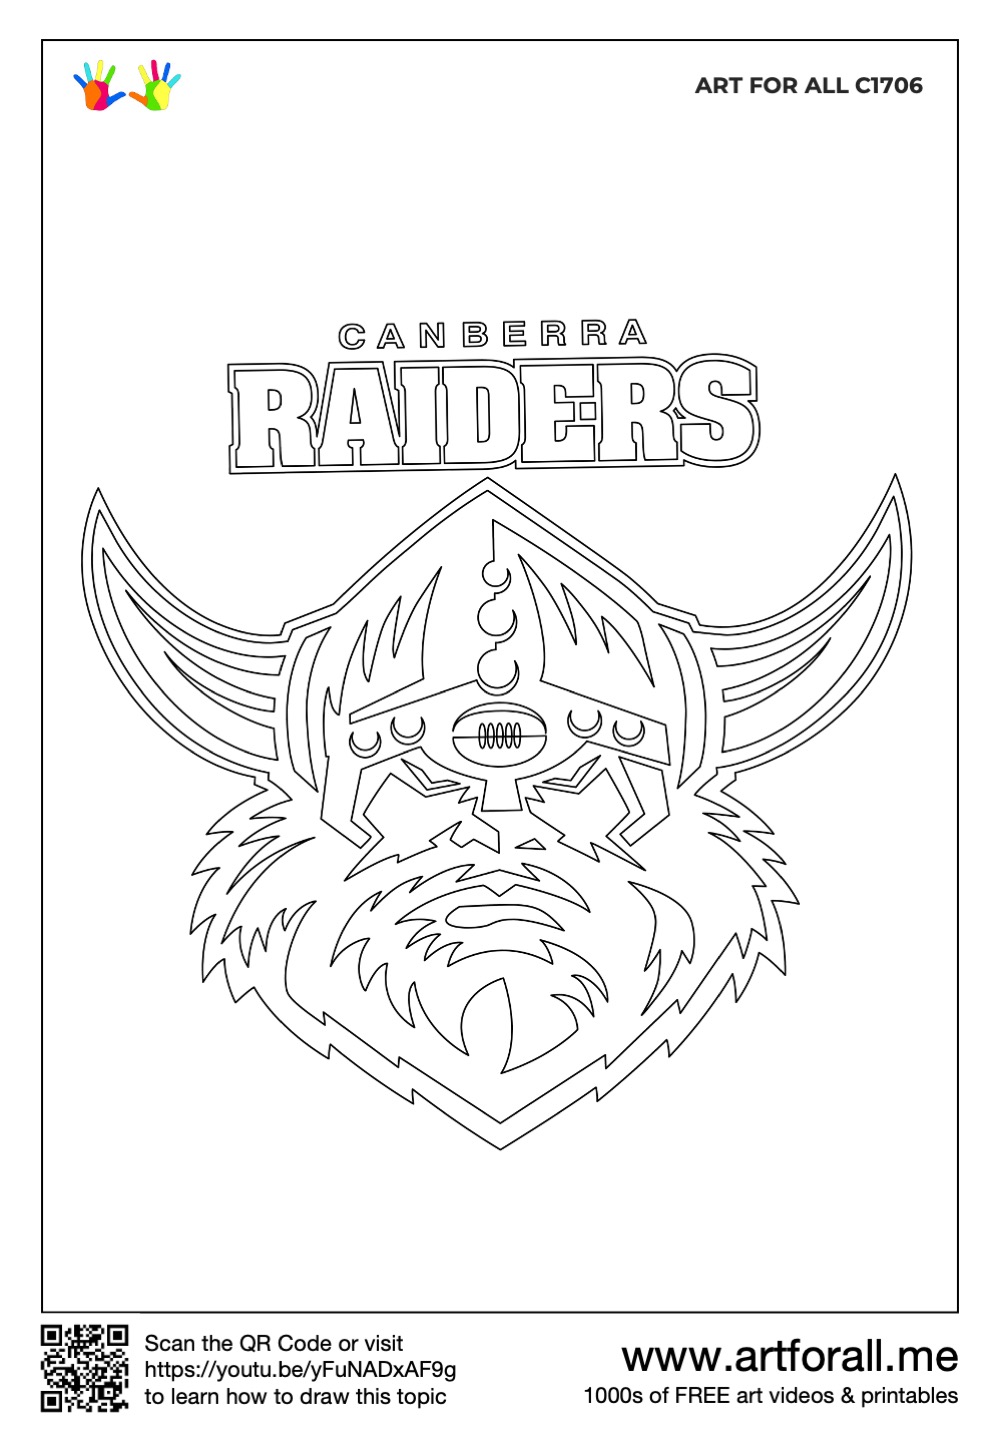 How to draw the canberra raiders logo